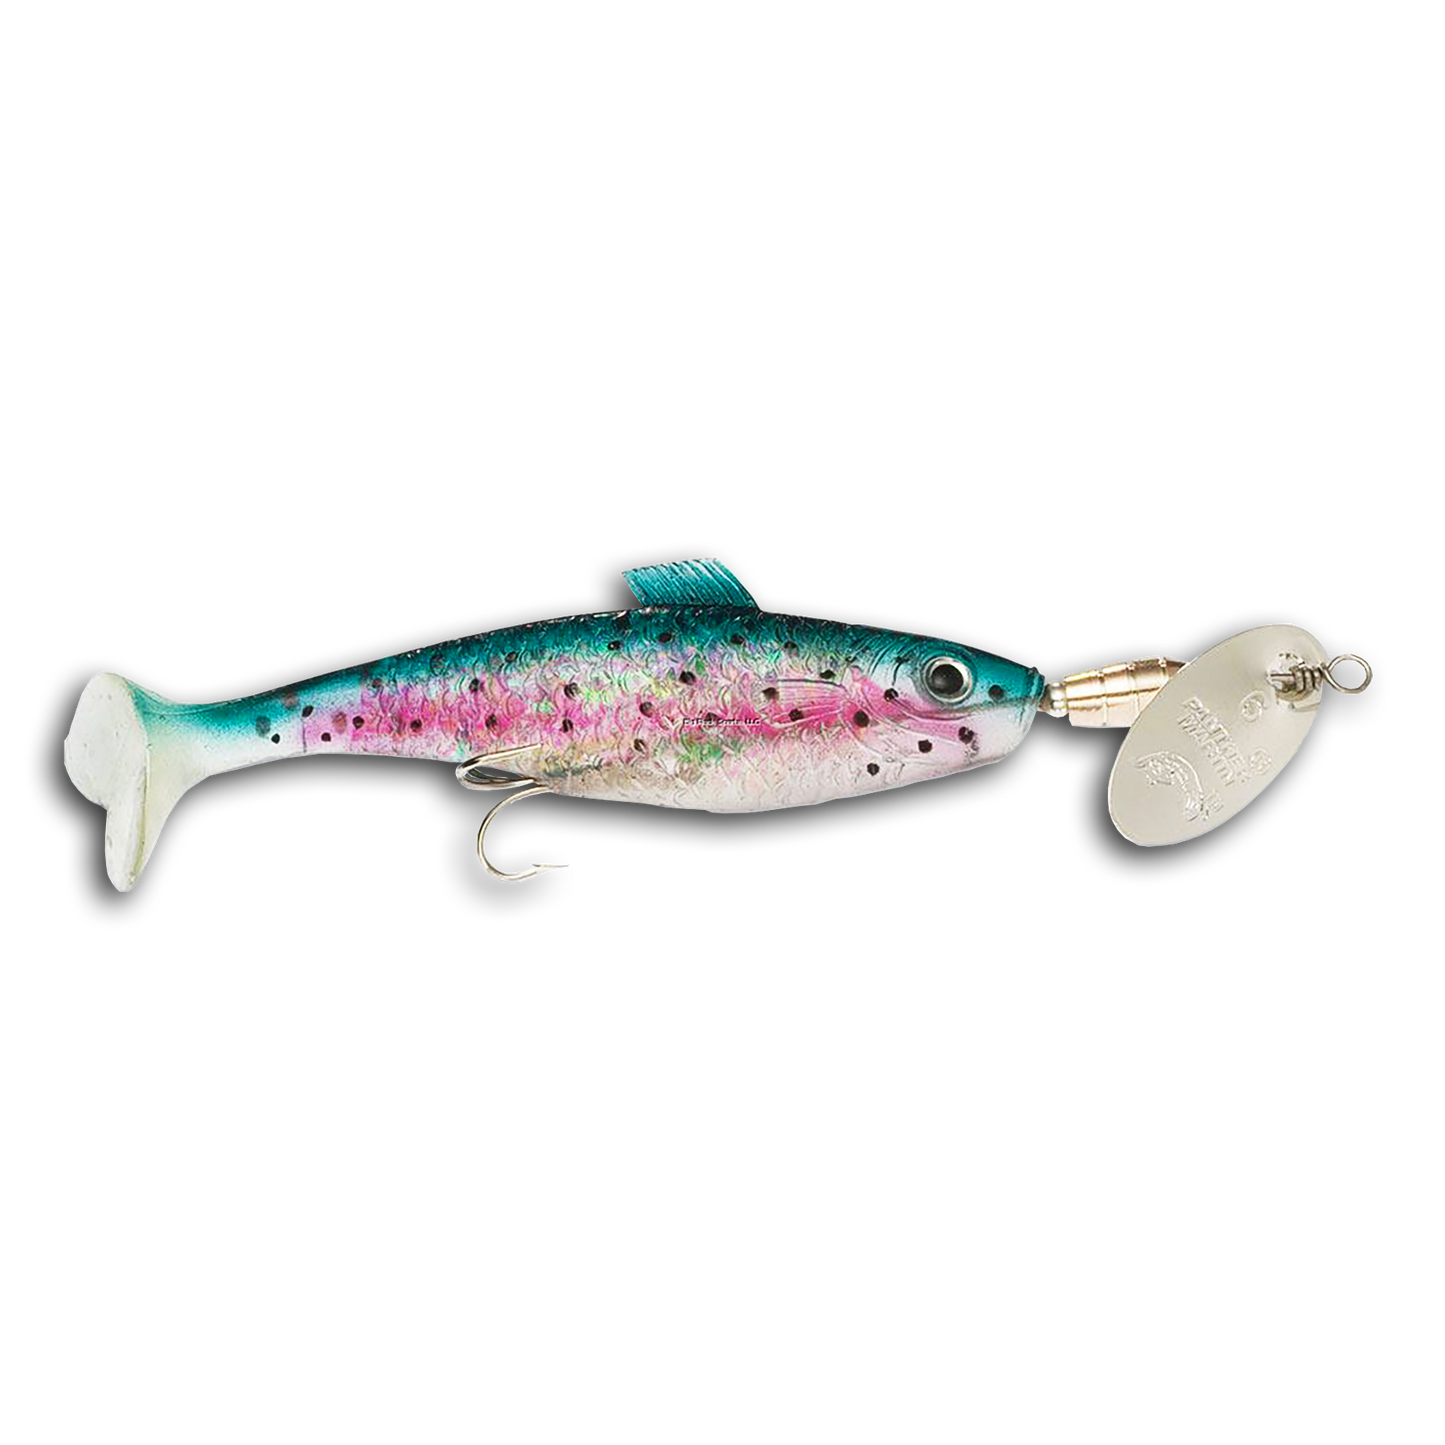 2" PANTHER MARTIN VIVIF STYLE MINNOW SPINNER